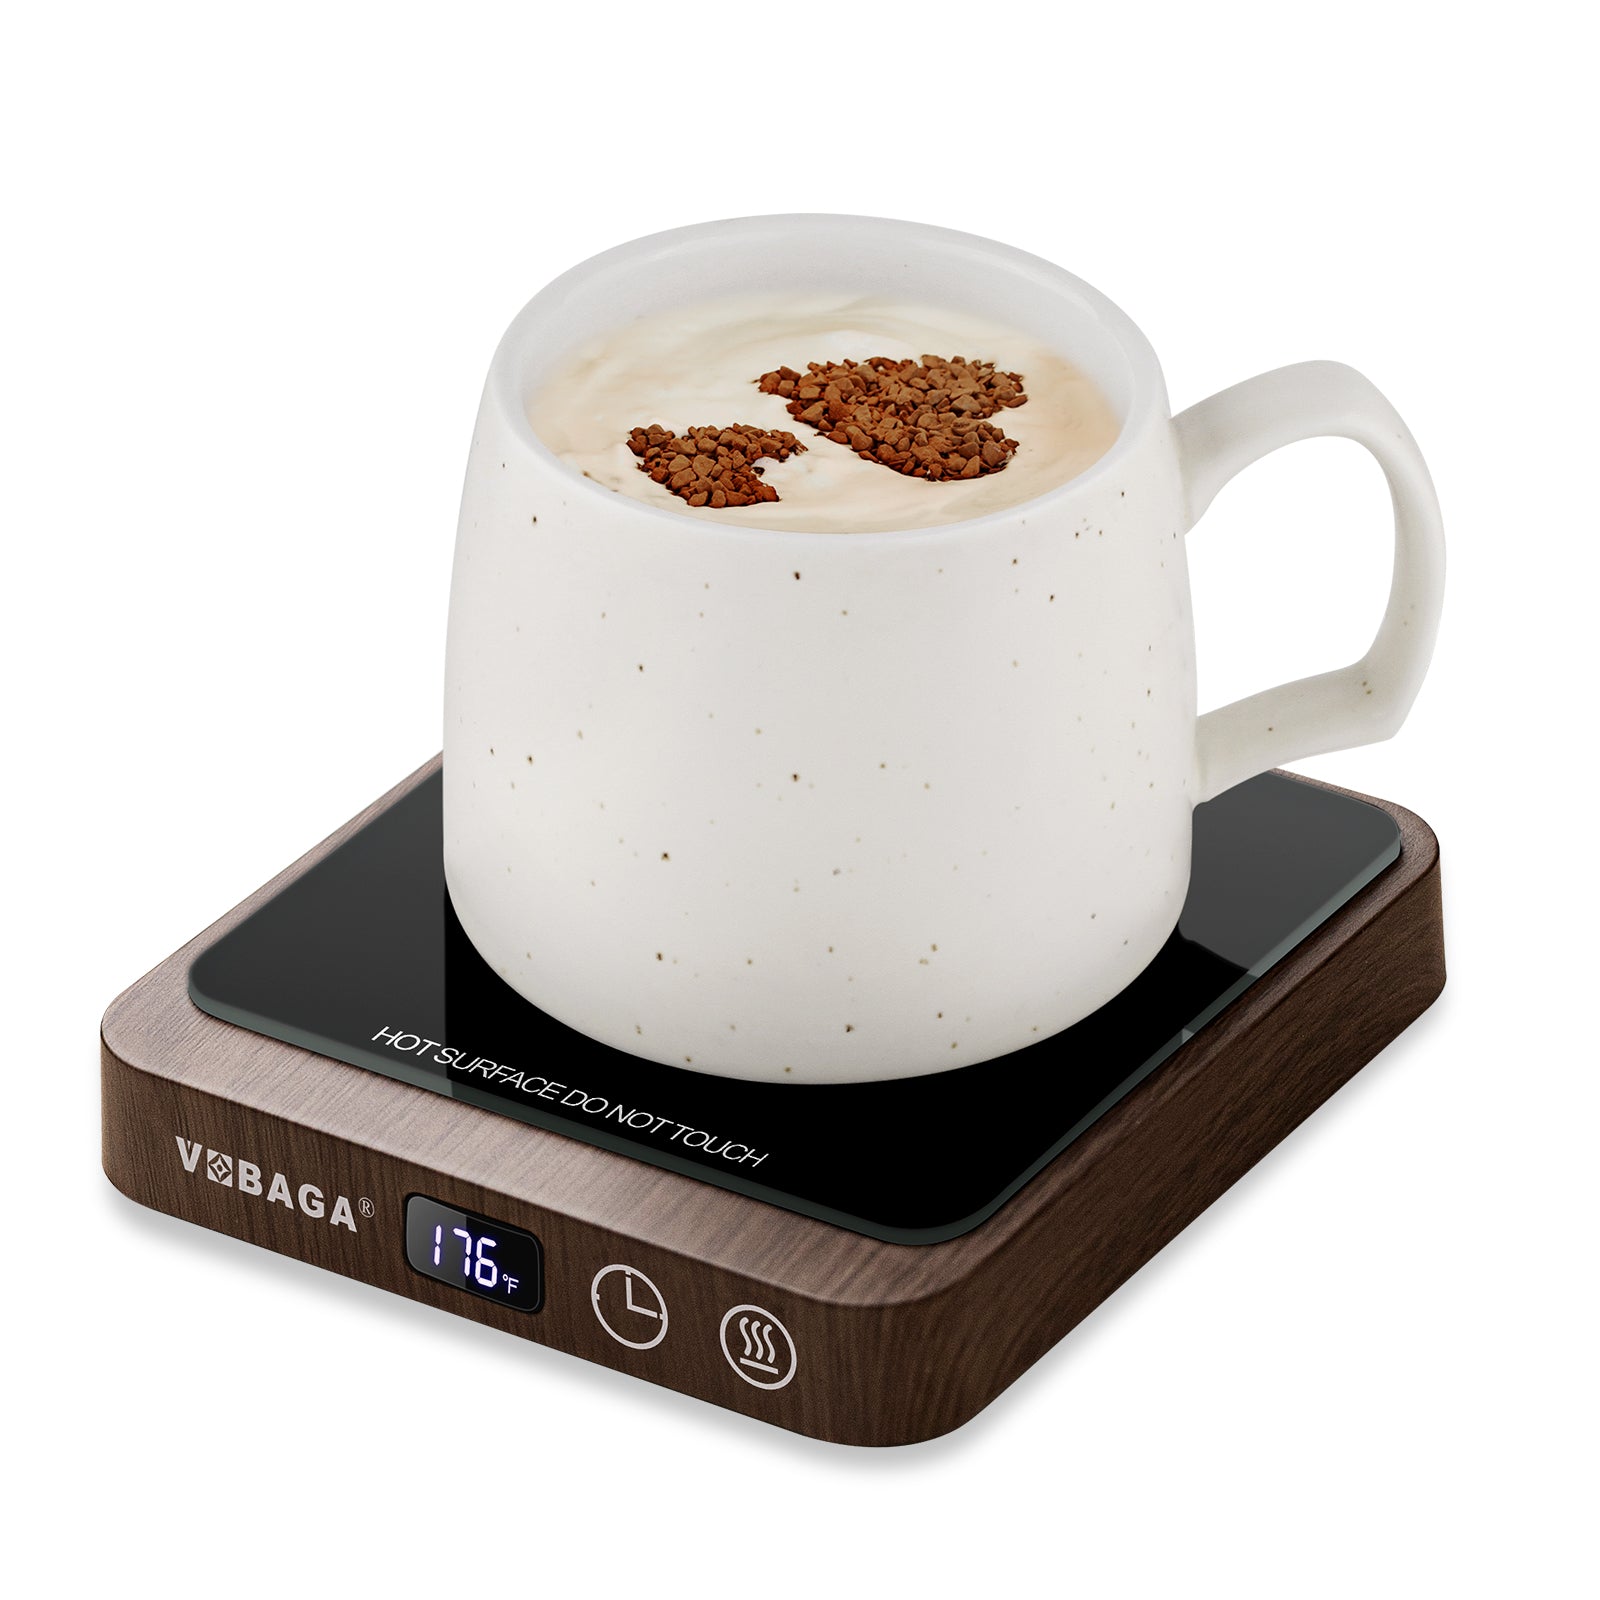 VOBAGA Mug Warmer, Coffee Cup Warmer for Office Home Desk Use with 5 Temperature Settings, Electric Beverage Warmer with Digital Display Auto Shut Off for Heating Coffee, Cocoa, Milk, Tea(No Cup)